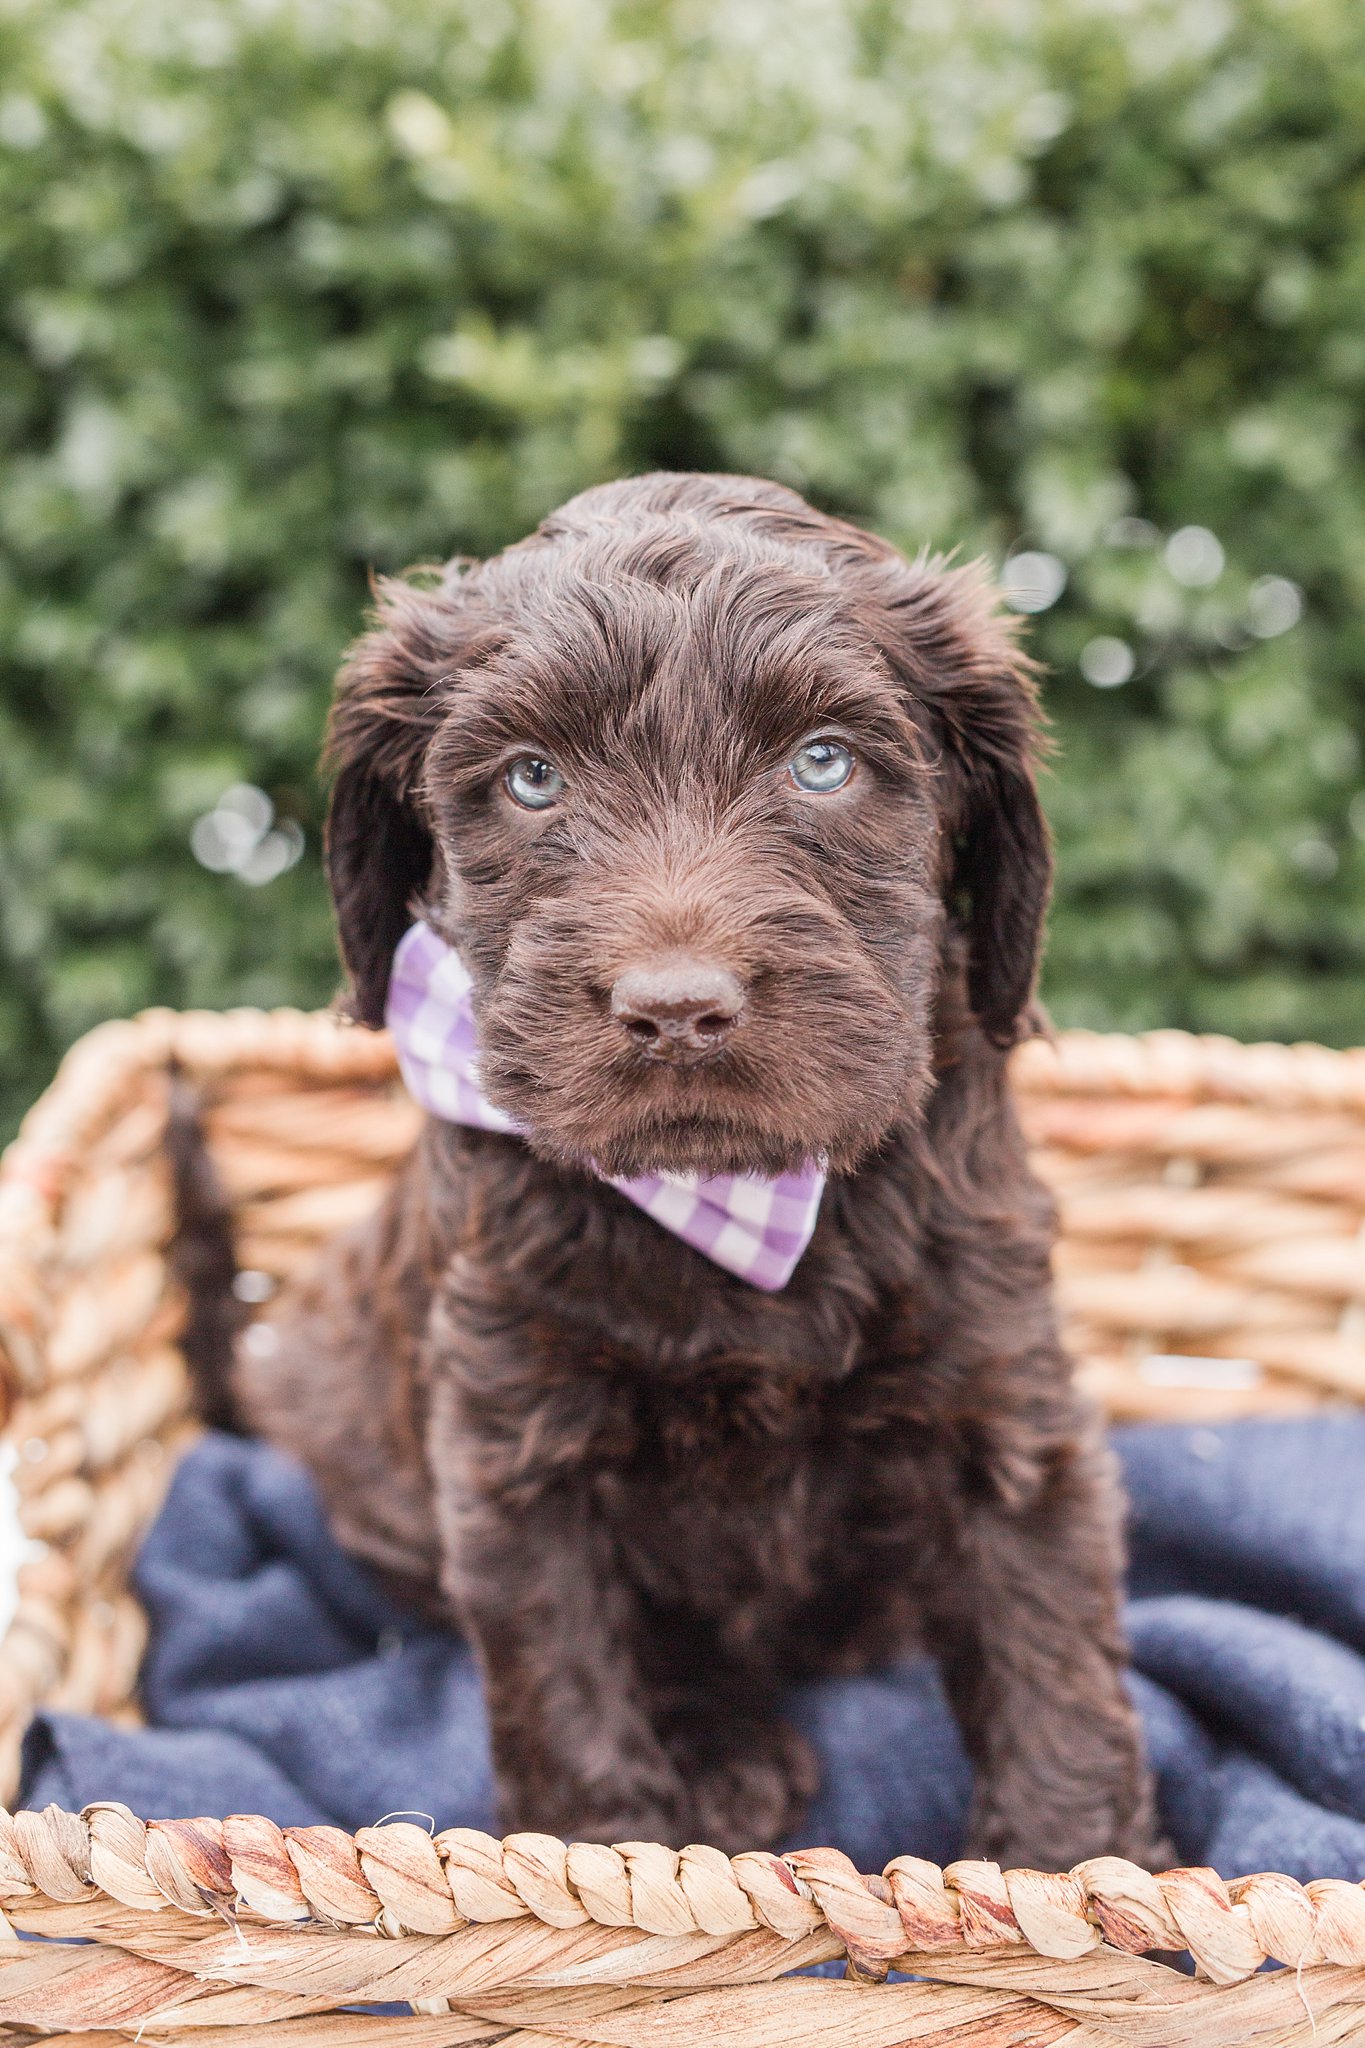 brown goldendoodle puppy wearing a purple bow tie